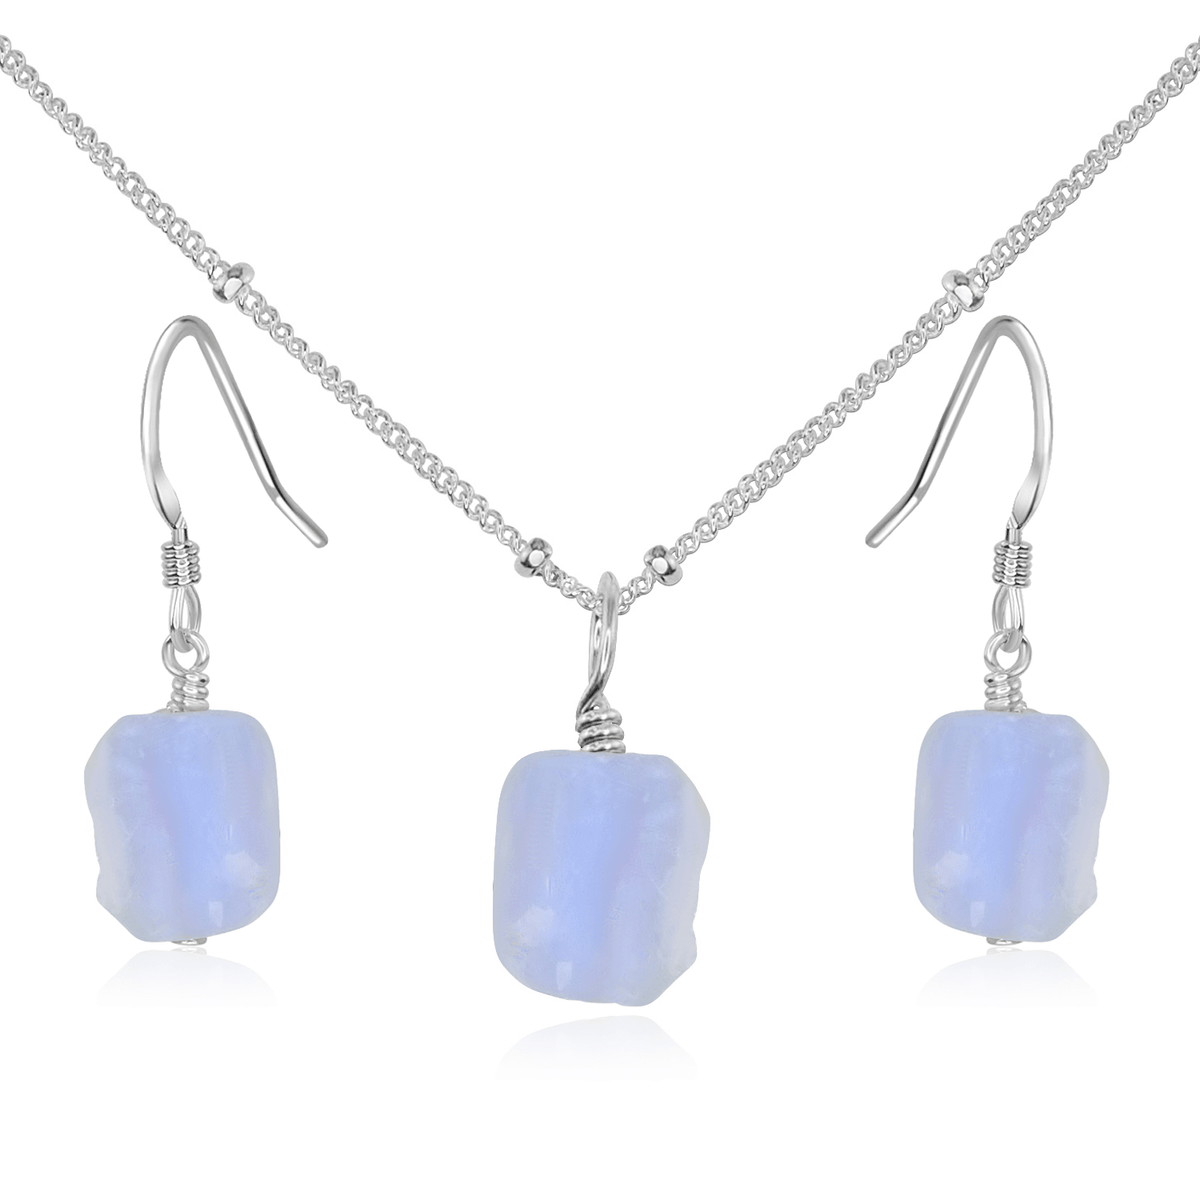 Raw Blue Lace Agate Crystal Earrings & Necklace Set - Raw Blue Lace Agate Crystal Earrings & Necklace Set - Sterling Silver / Satellite - Luna Tide Handmade Crystal Jewellery